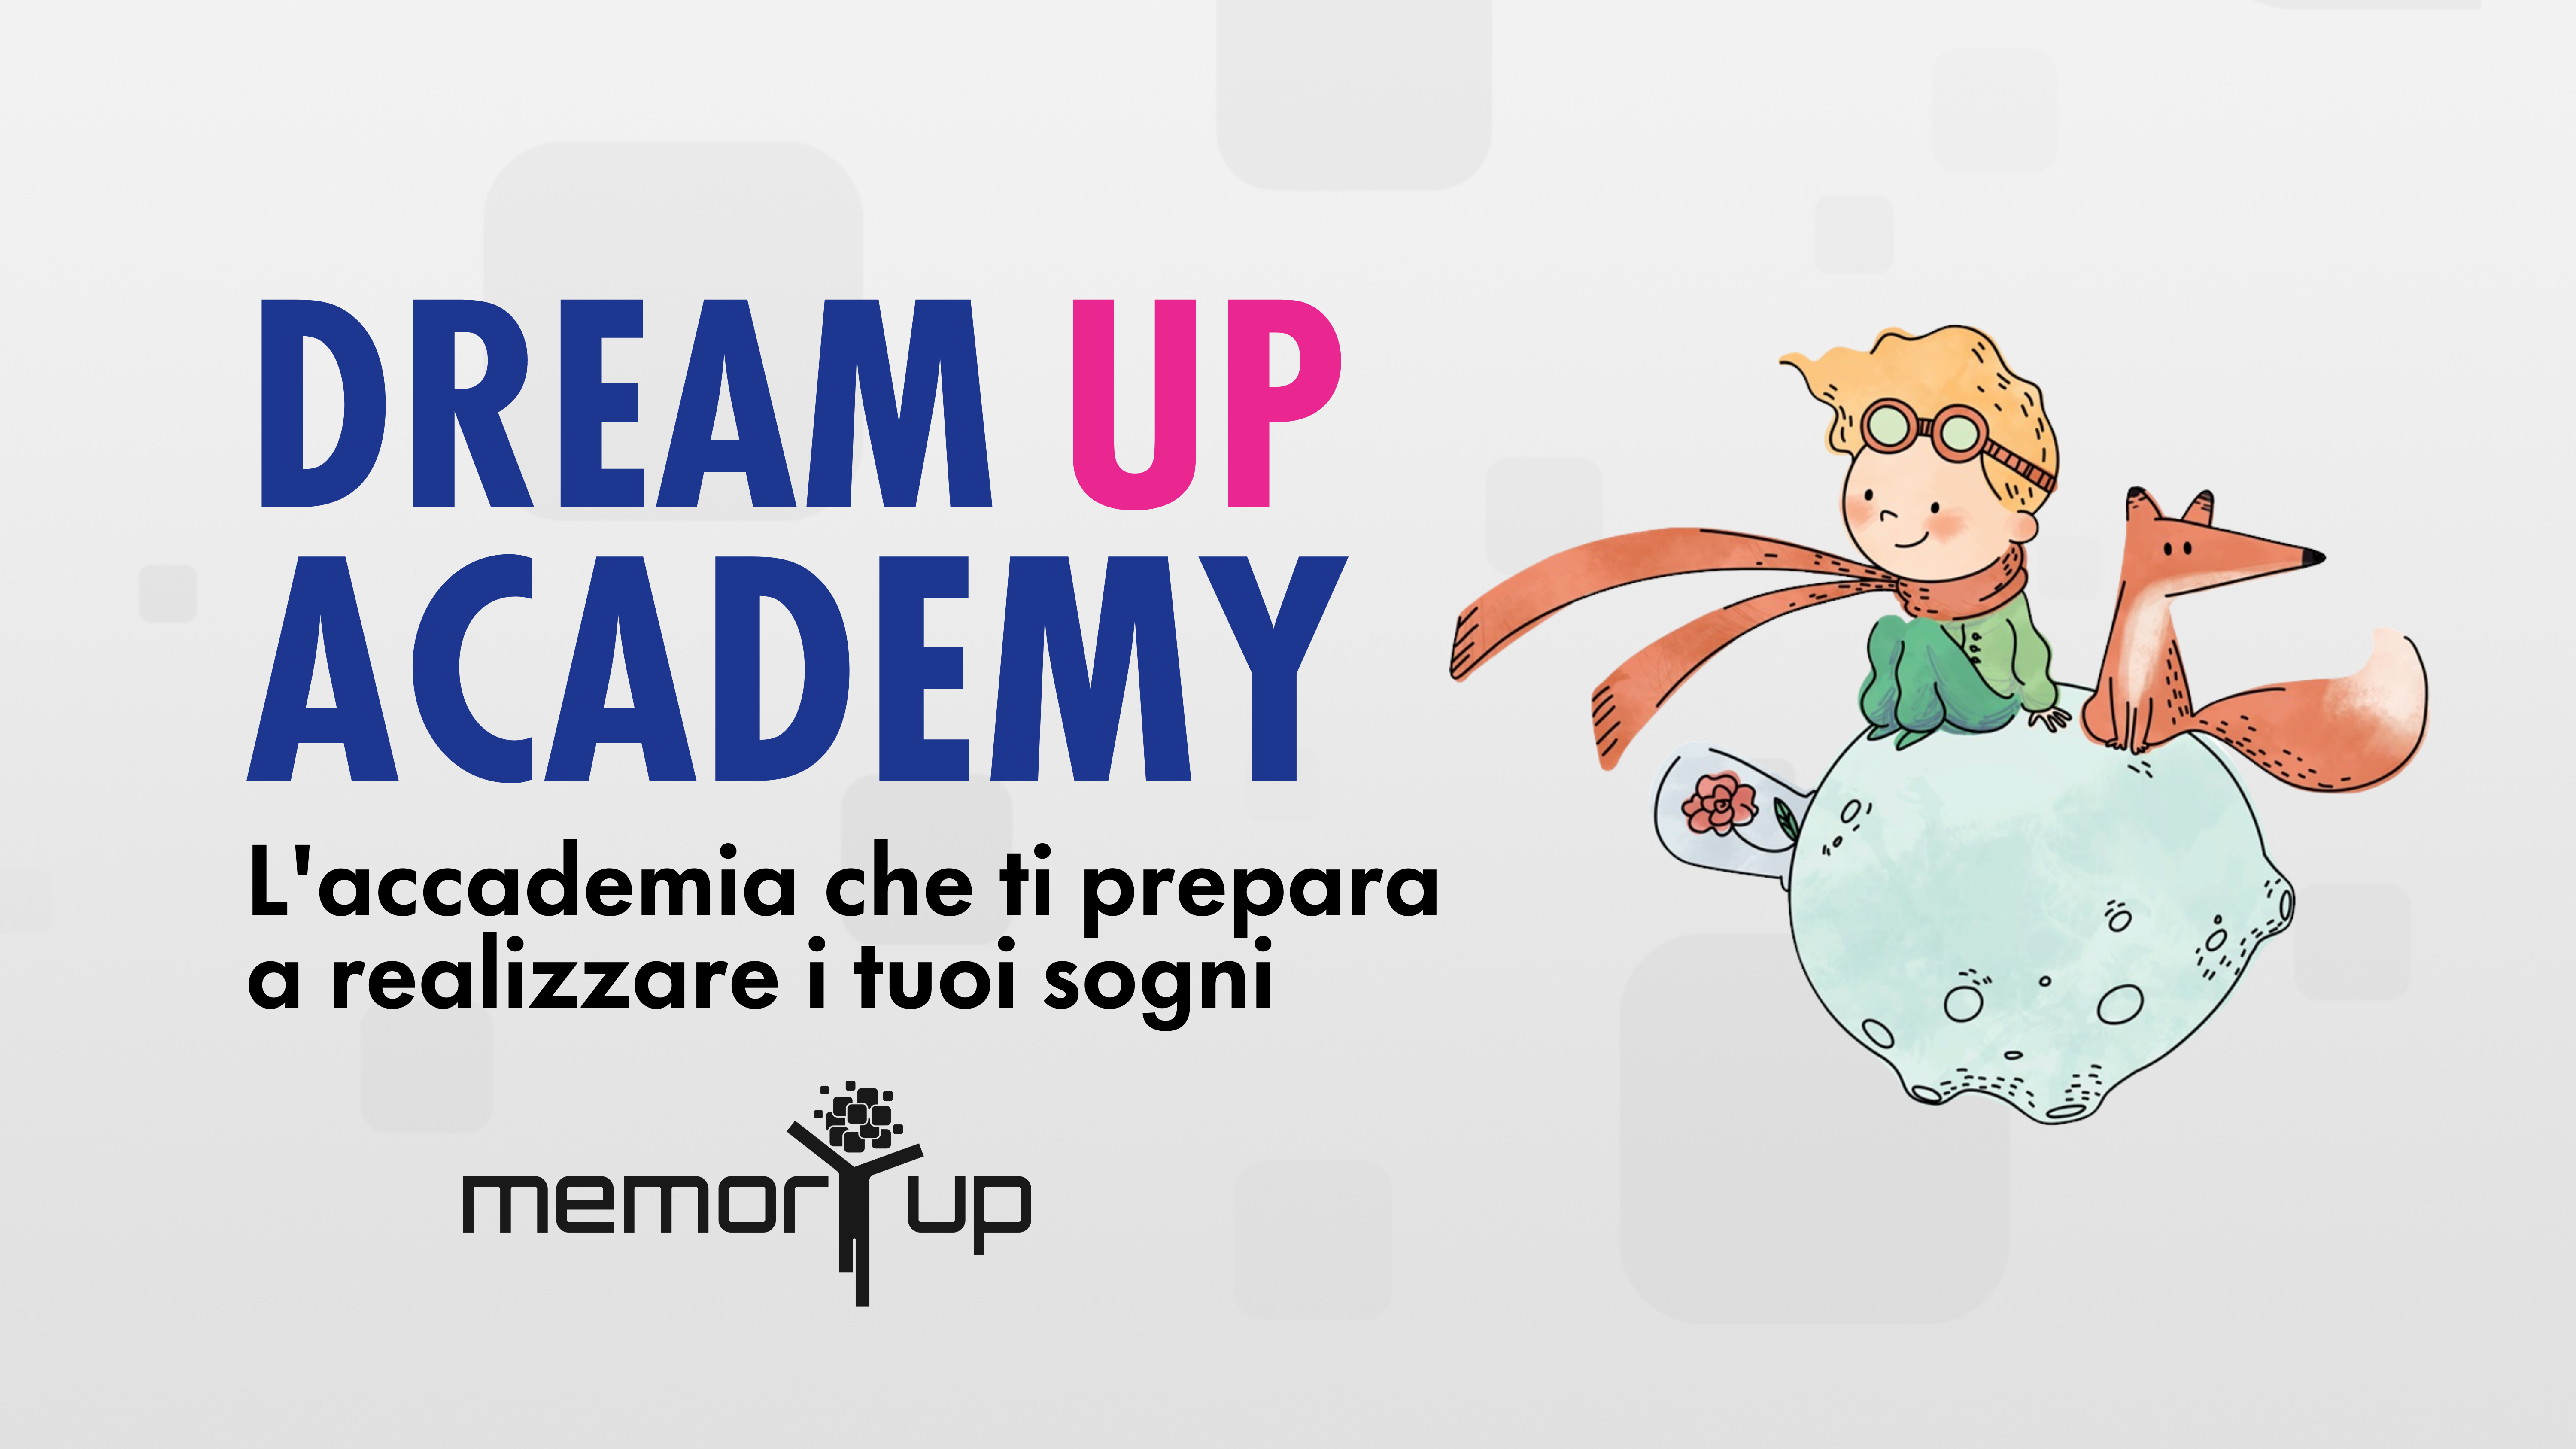 Protetto: DREAM UP ACADEMY